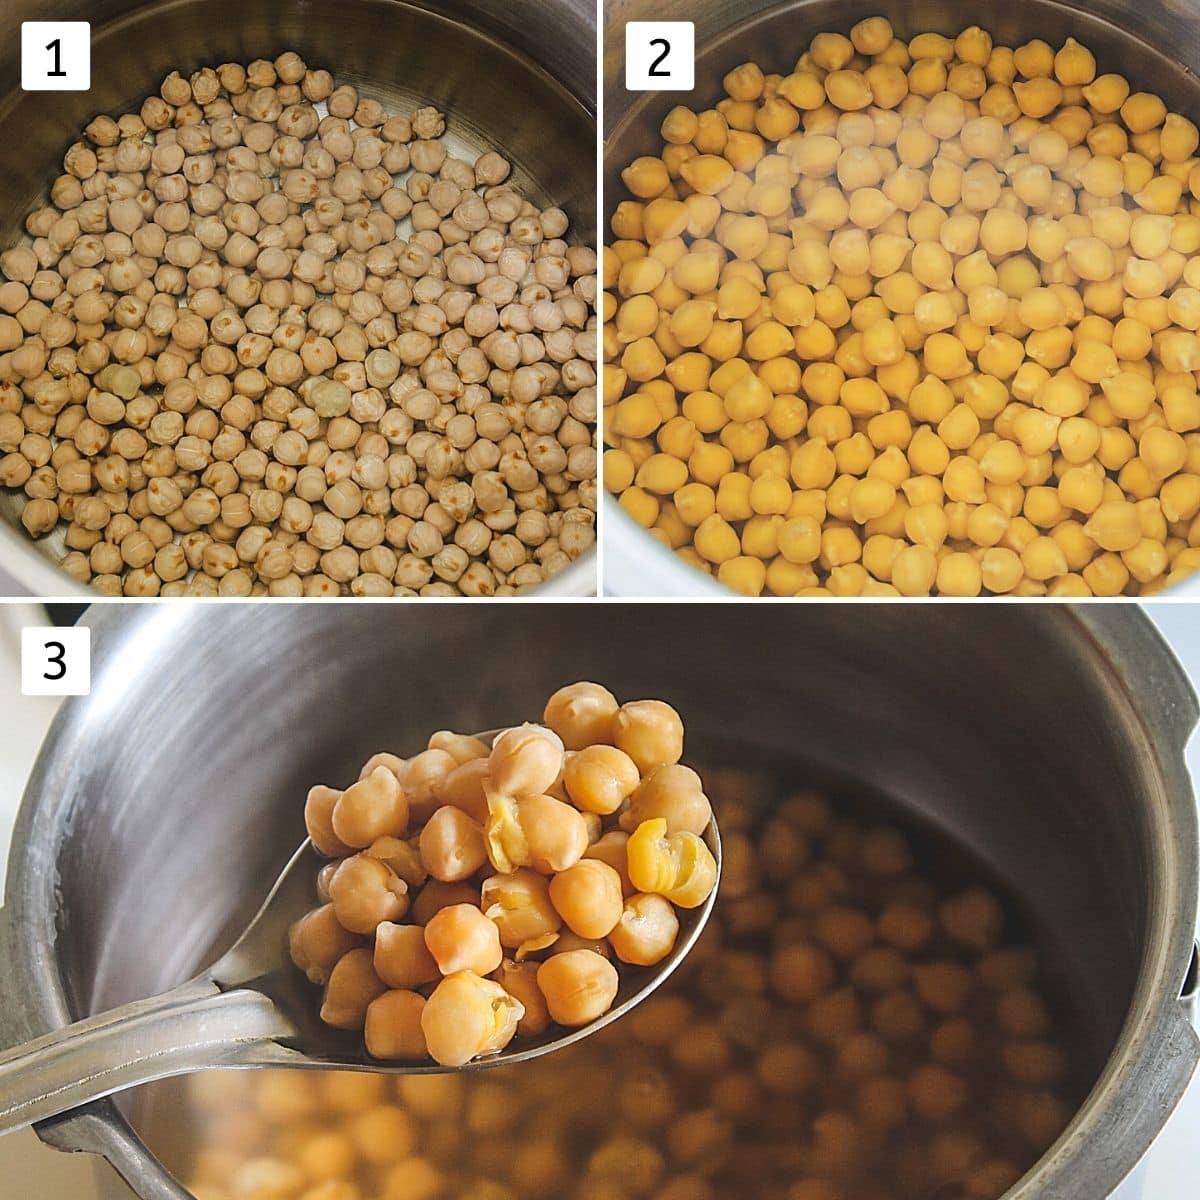 Collage of 3 images showing soaked chickpeas and boiled chickpeas.